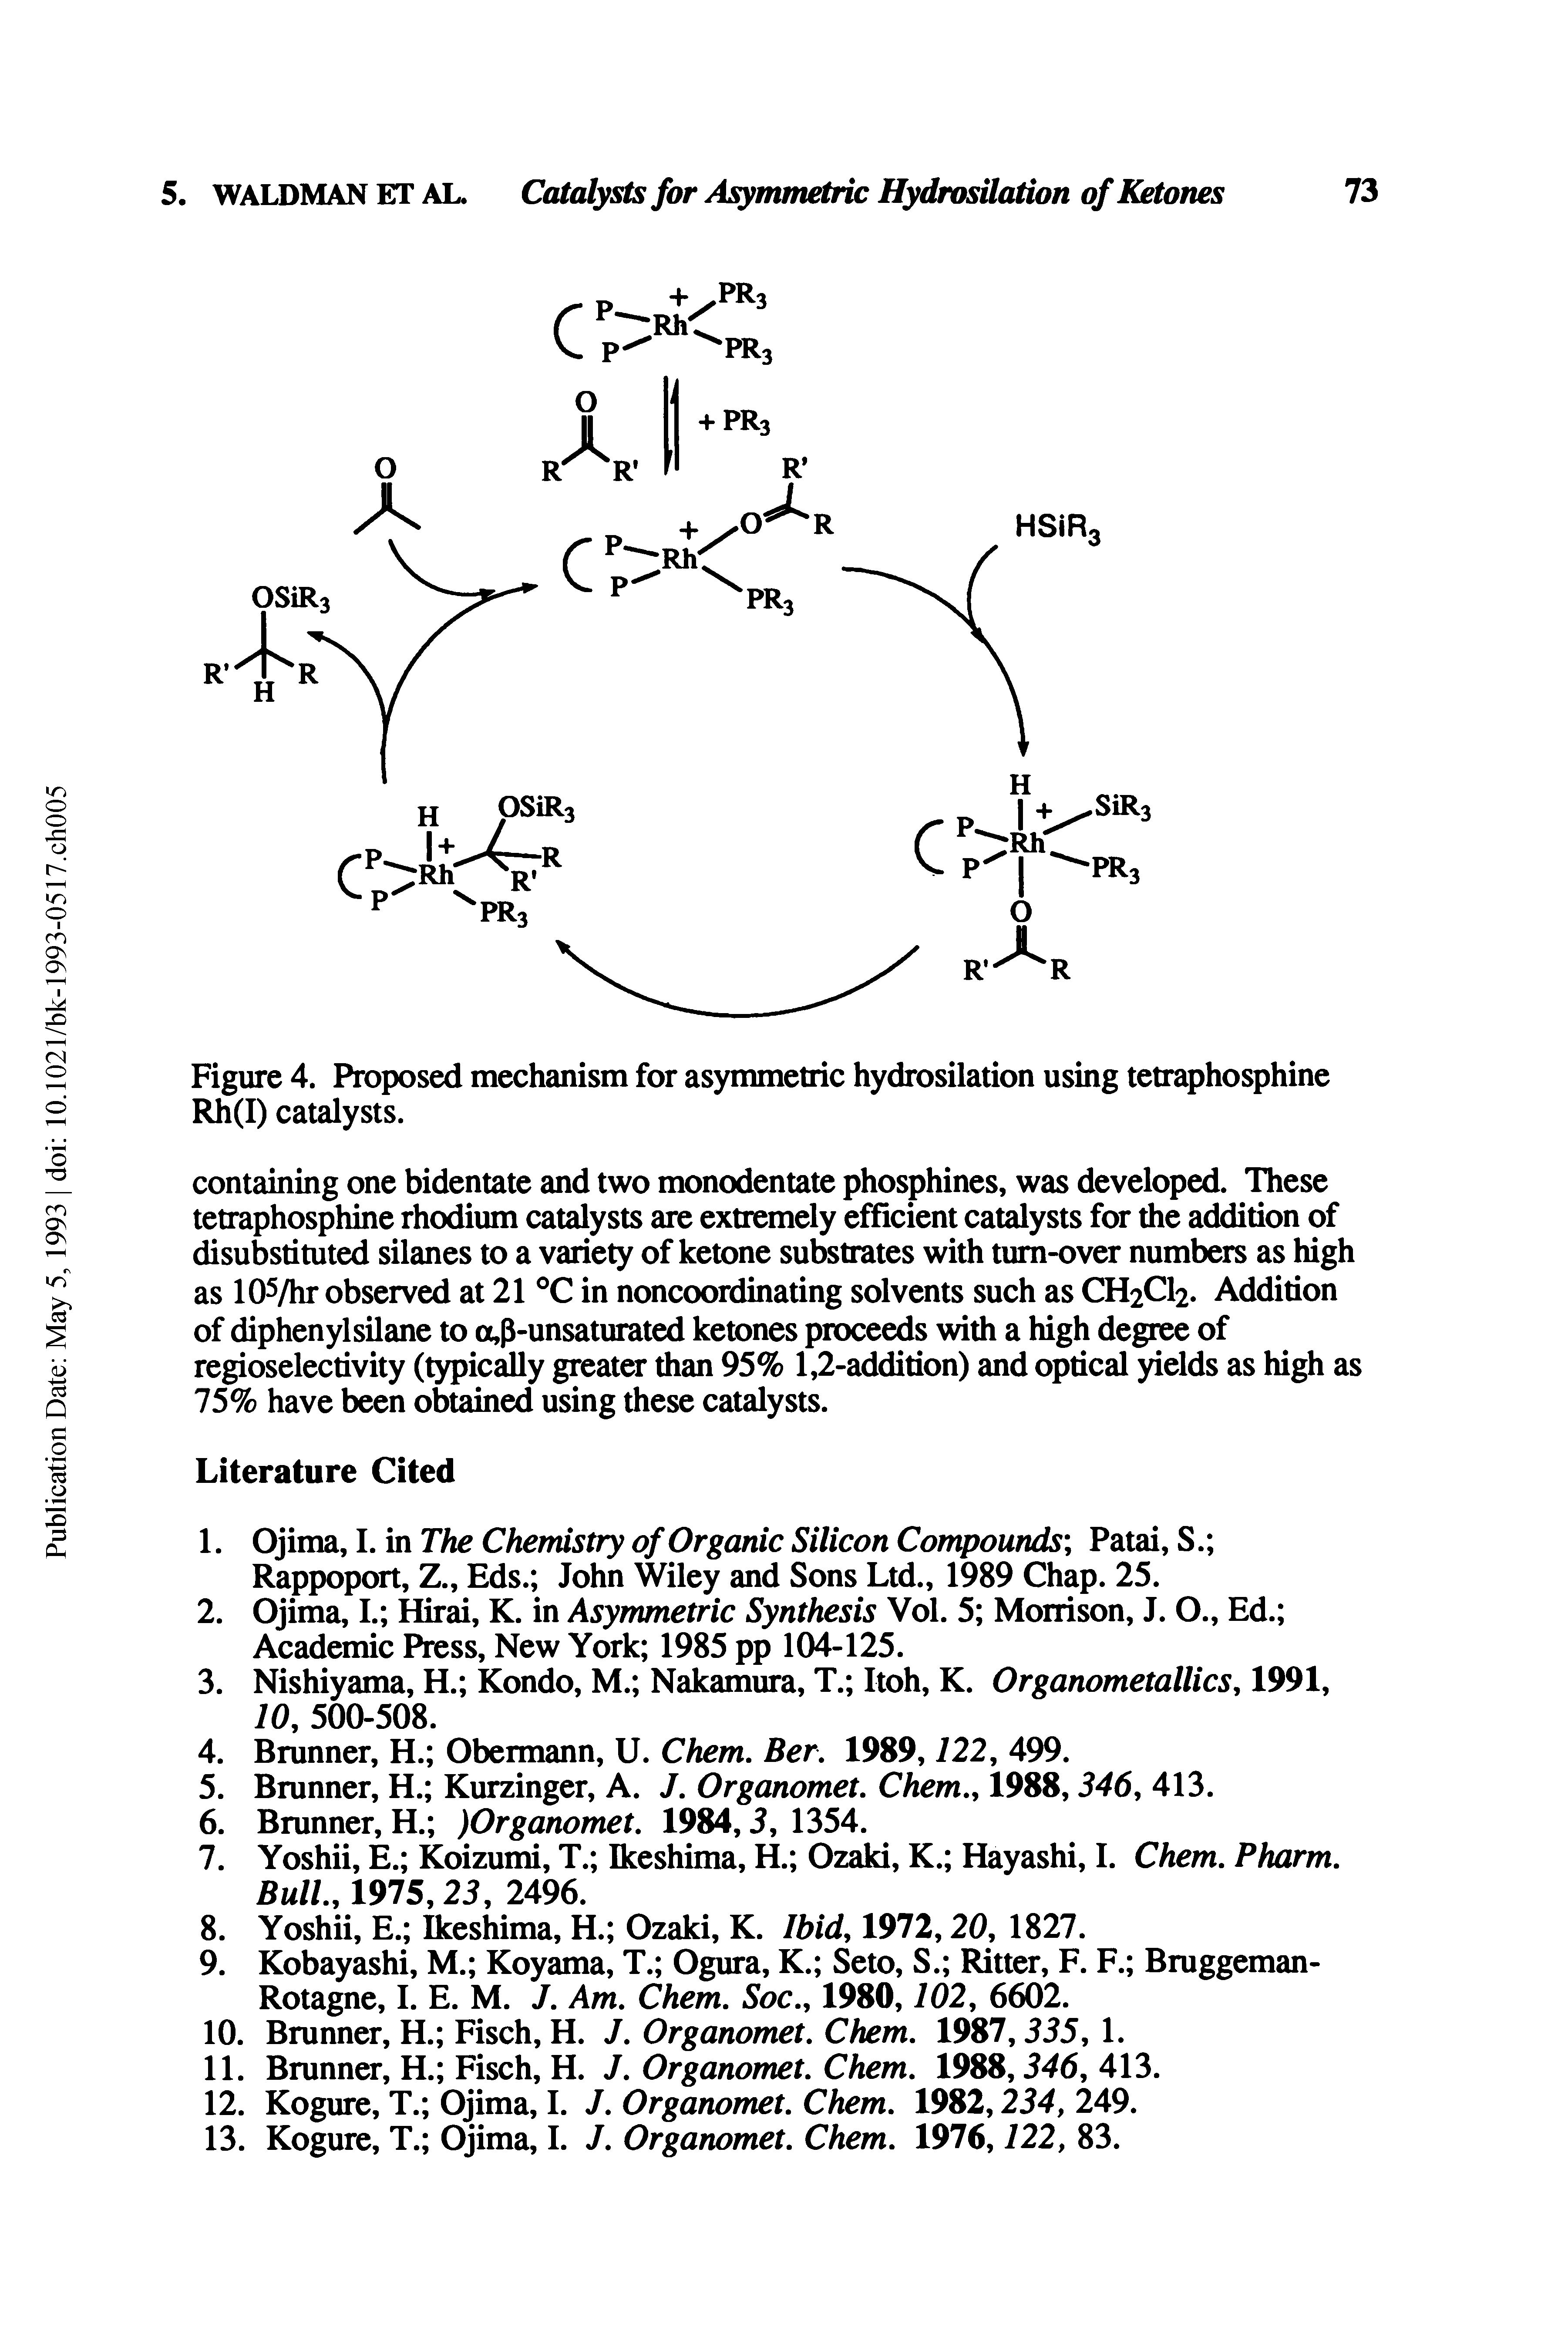 Figure 4. Proposed mechanism for asymmetric hydrosilation using tetraphosphine Rh(I) catalysts.